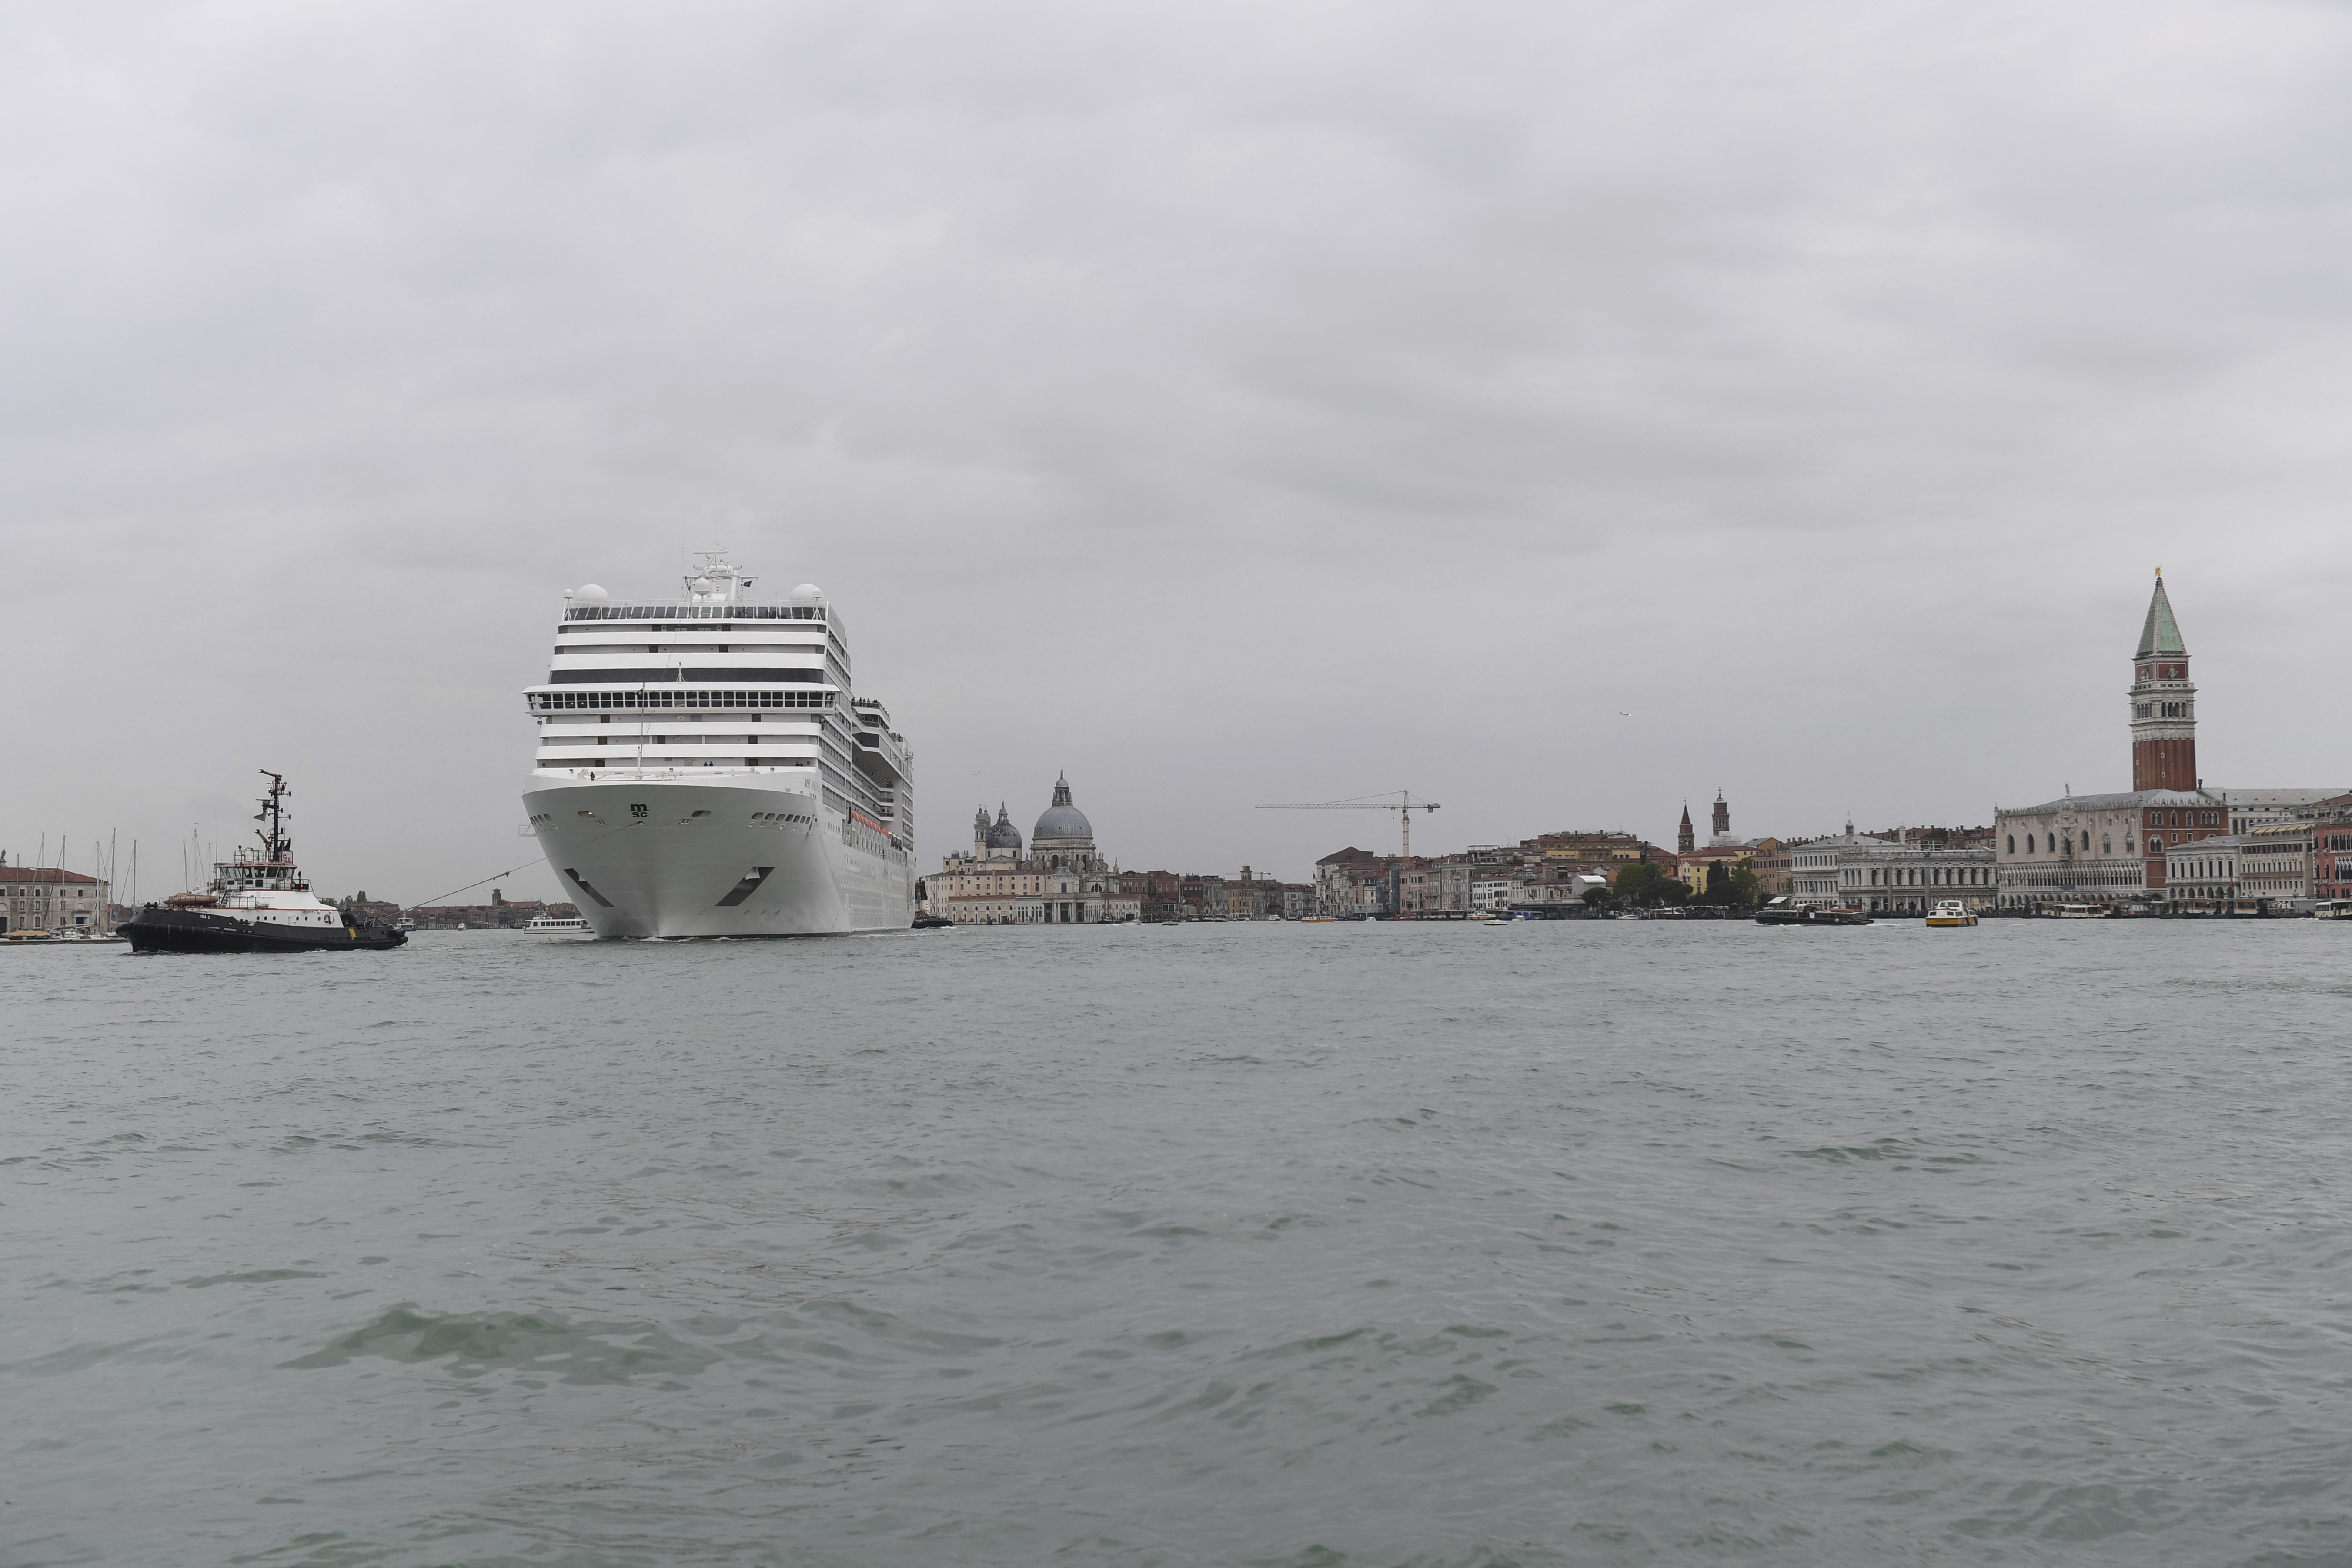 12 May 2019, Italy, Venedig: A cruise ship passes the lagoon city Venice pulled by a tug. The international art exhibition starts on 11.05.2019 and ends on 24.11.2019. Photo by: Felix H'rhager/picture-alliance/dpa/AP Images